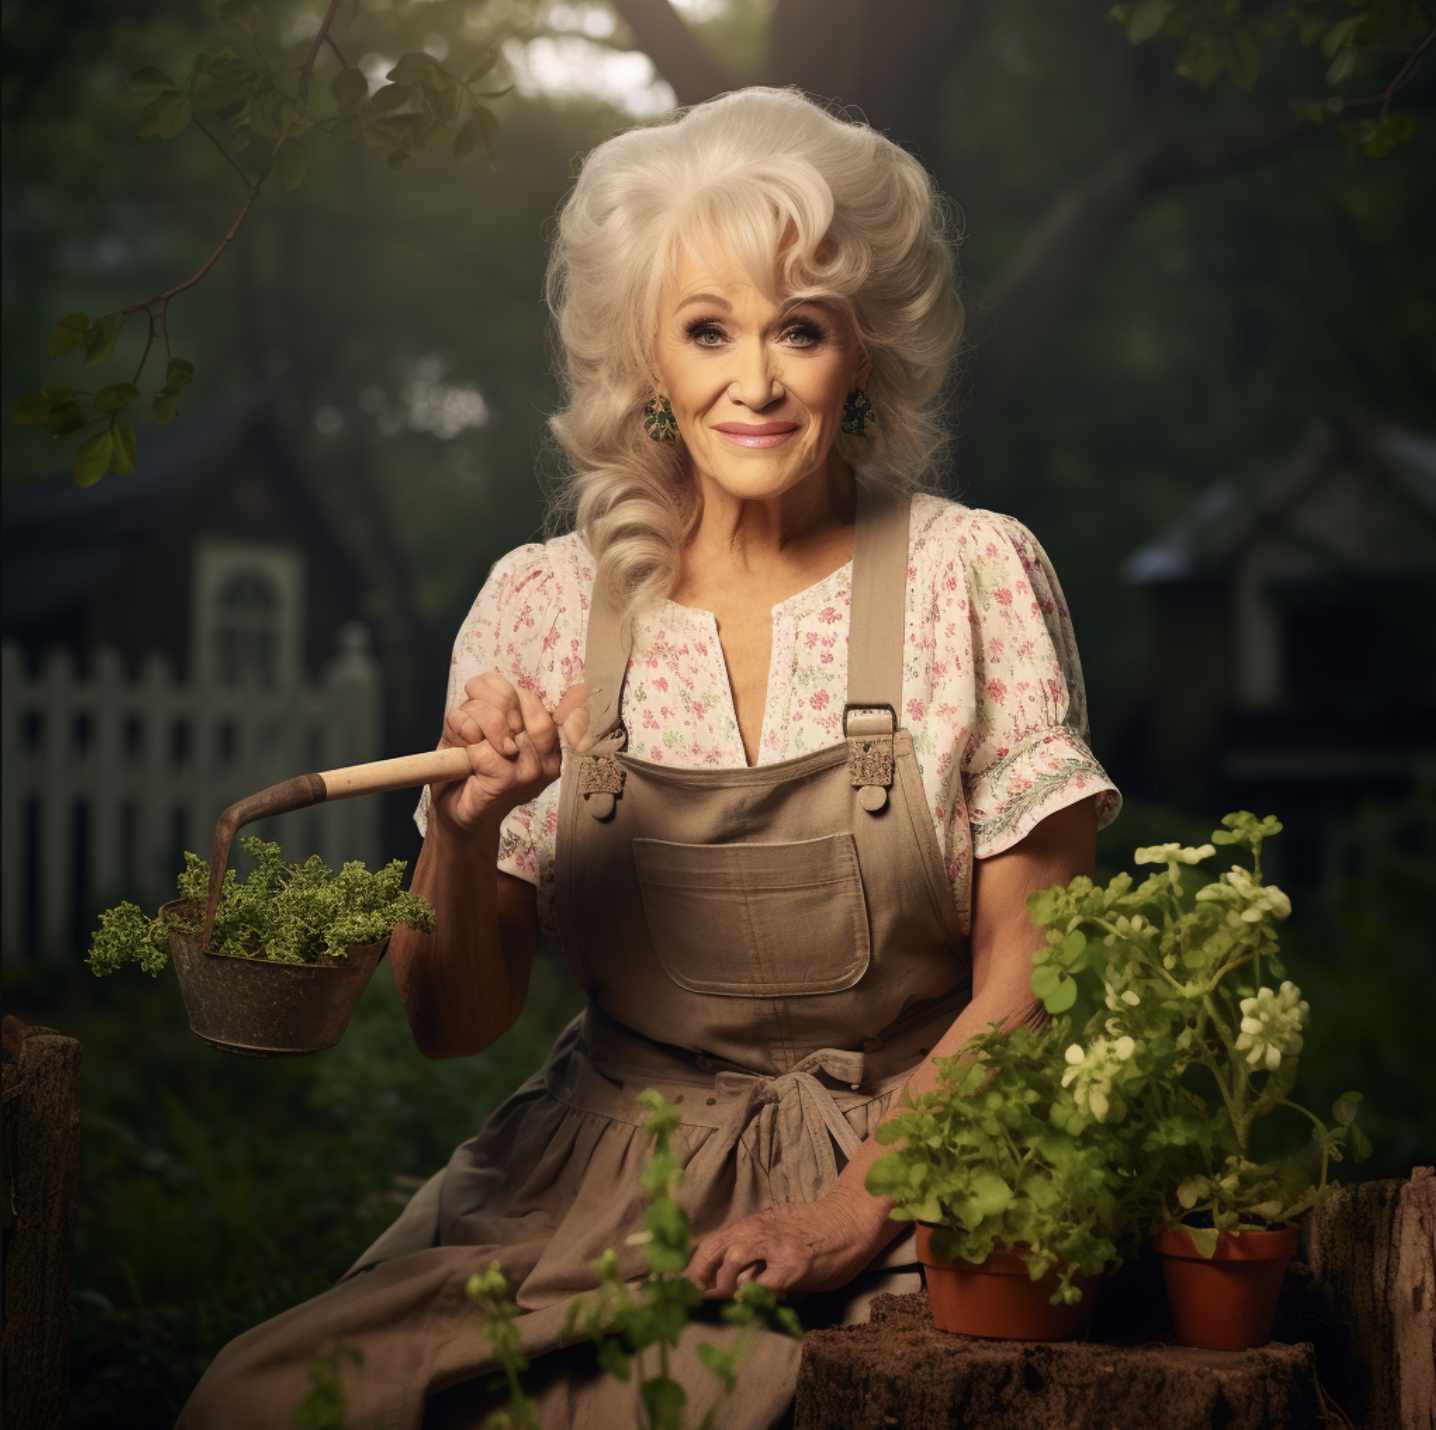 How farm-loving Carrie Underwood might look at 70 via AI | Source: Midjourney